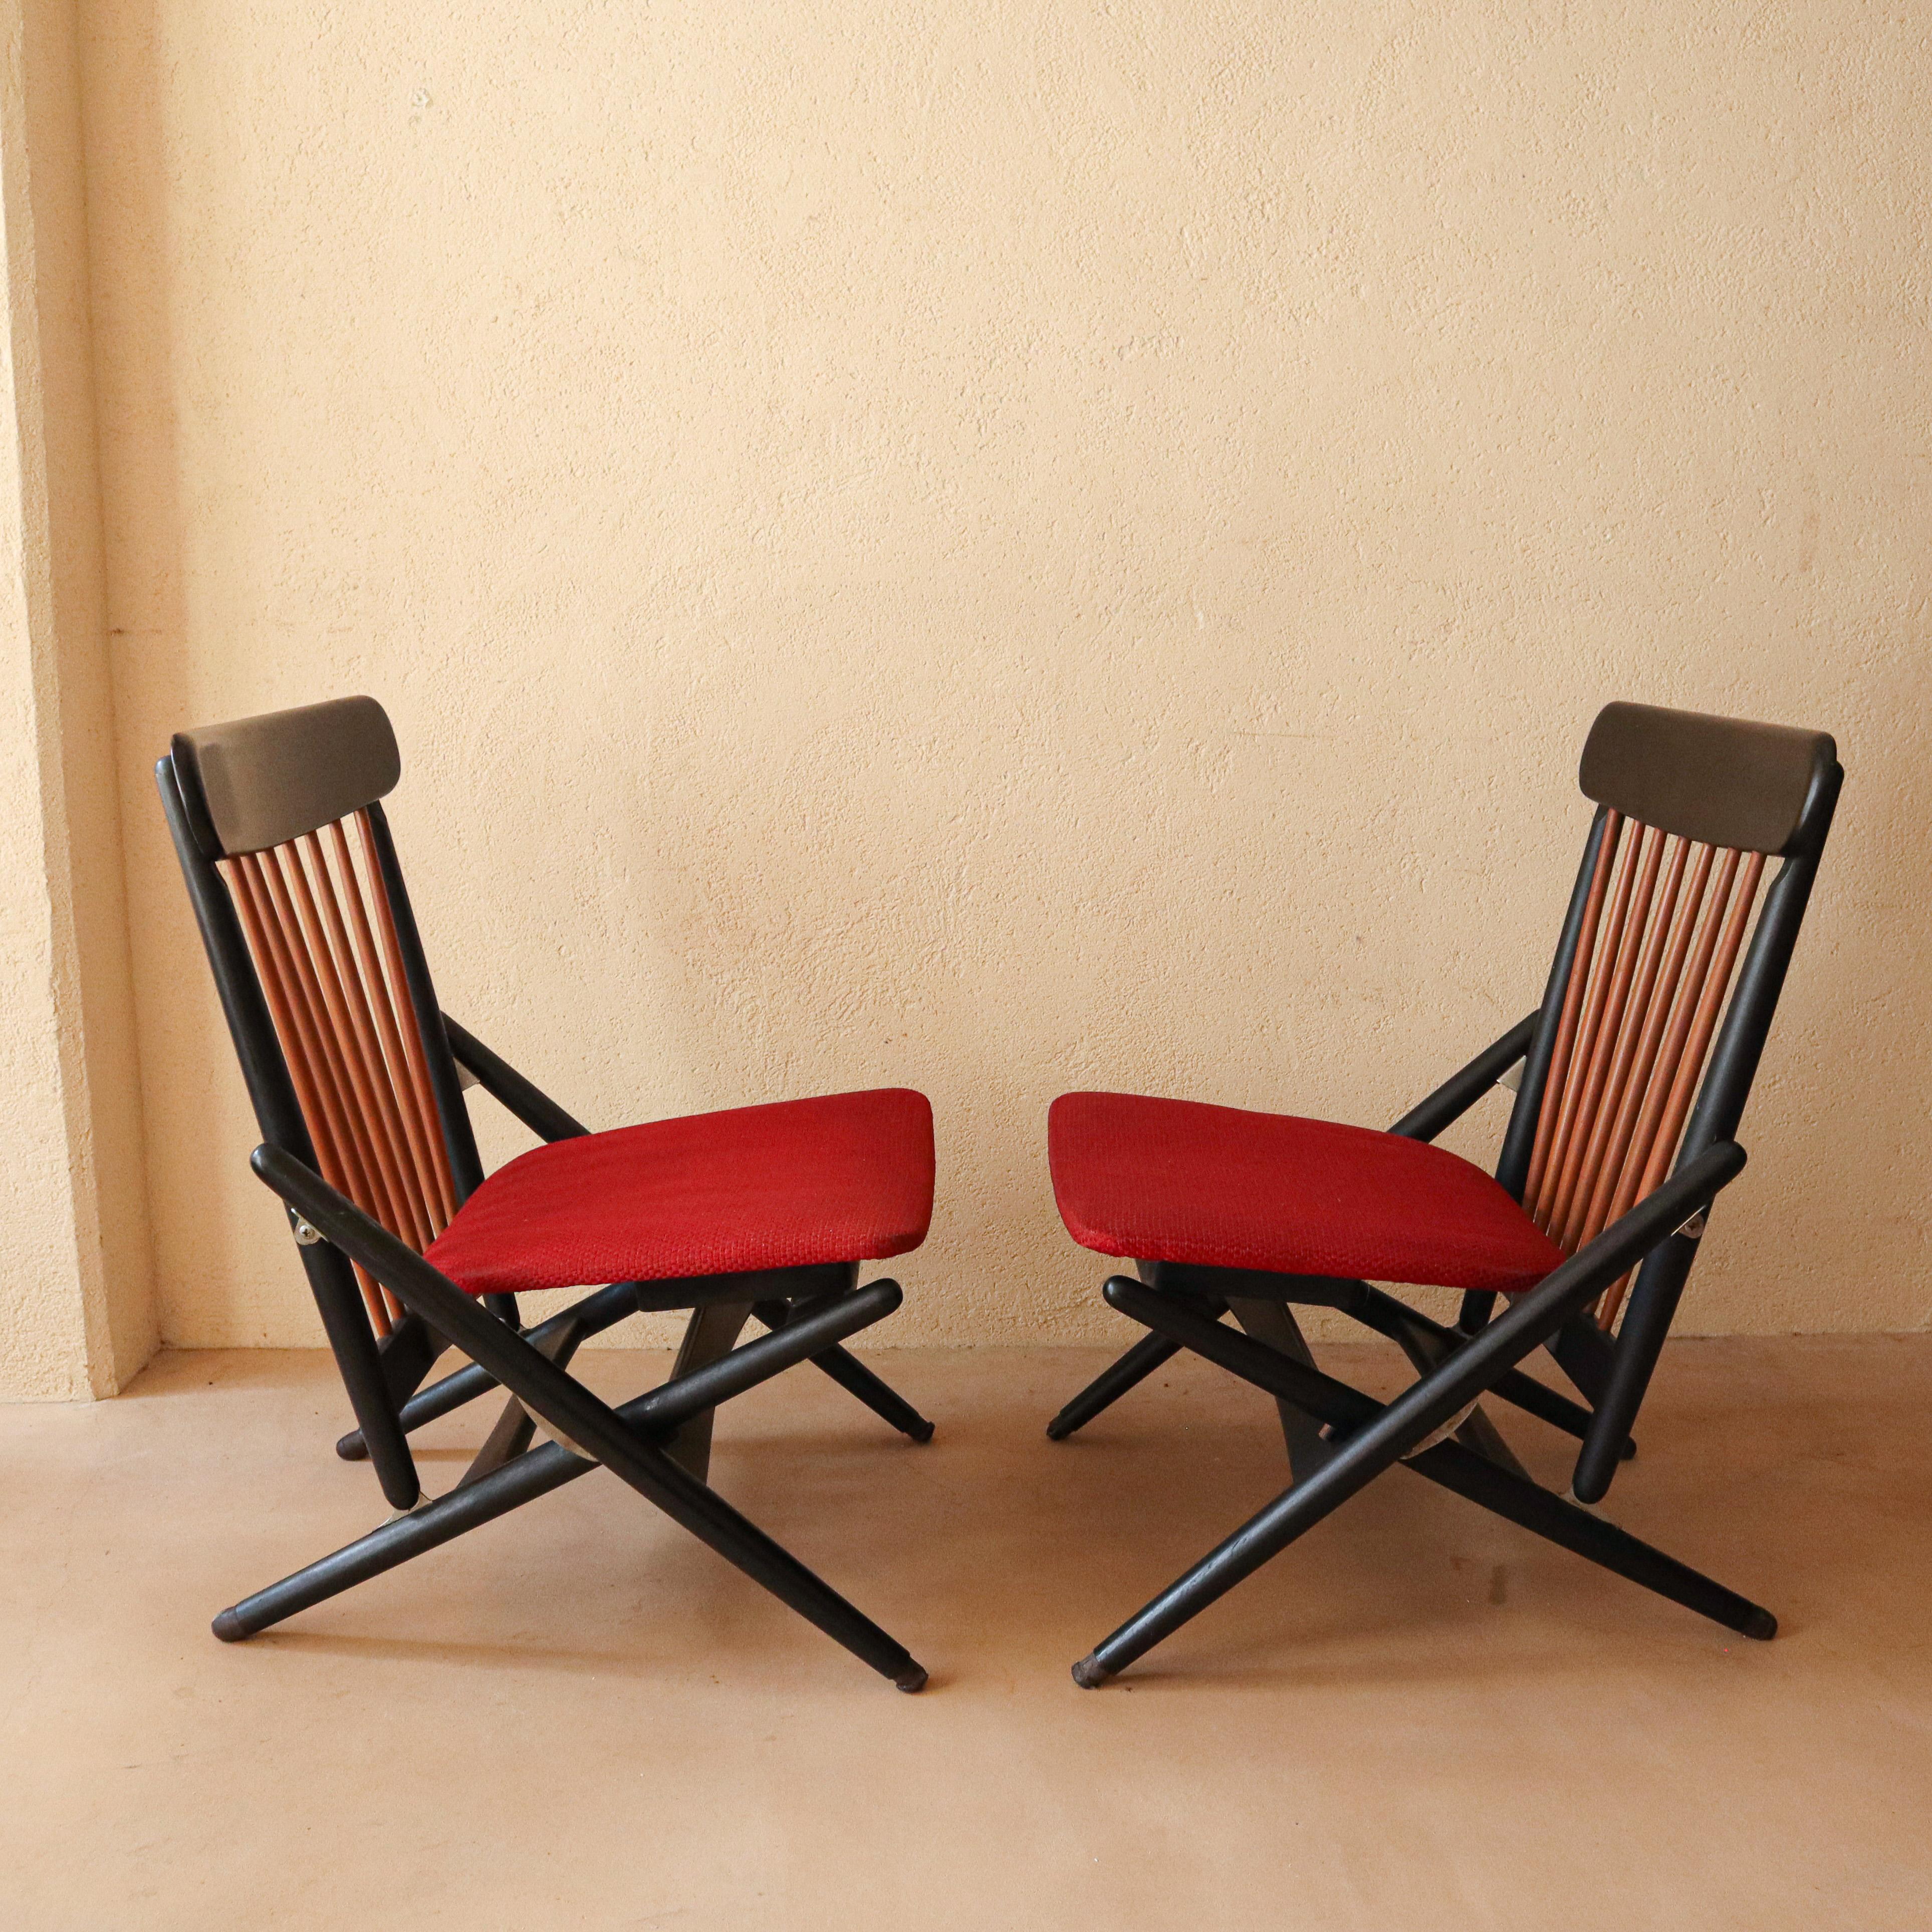 Stained Japanese Midcentury Rare Pair of Maruni Folding Lounge Chairs For Sale